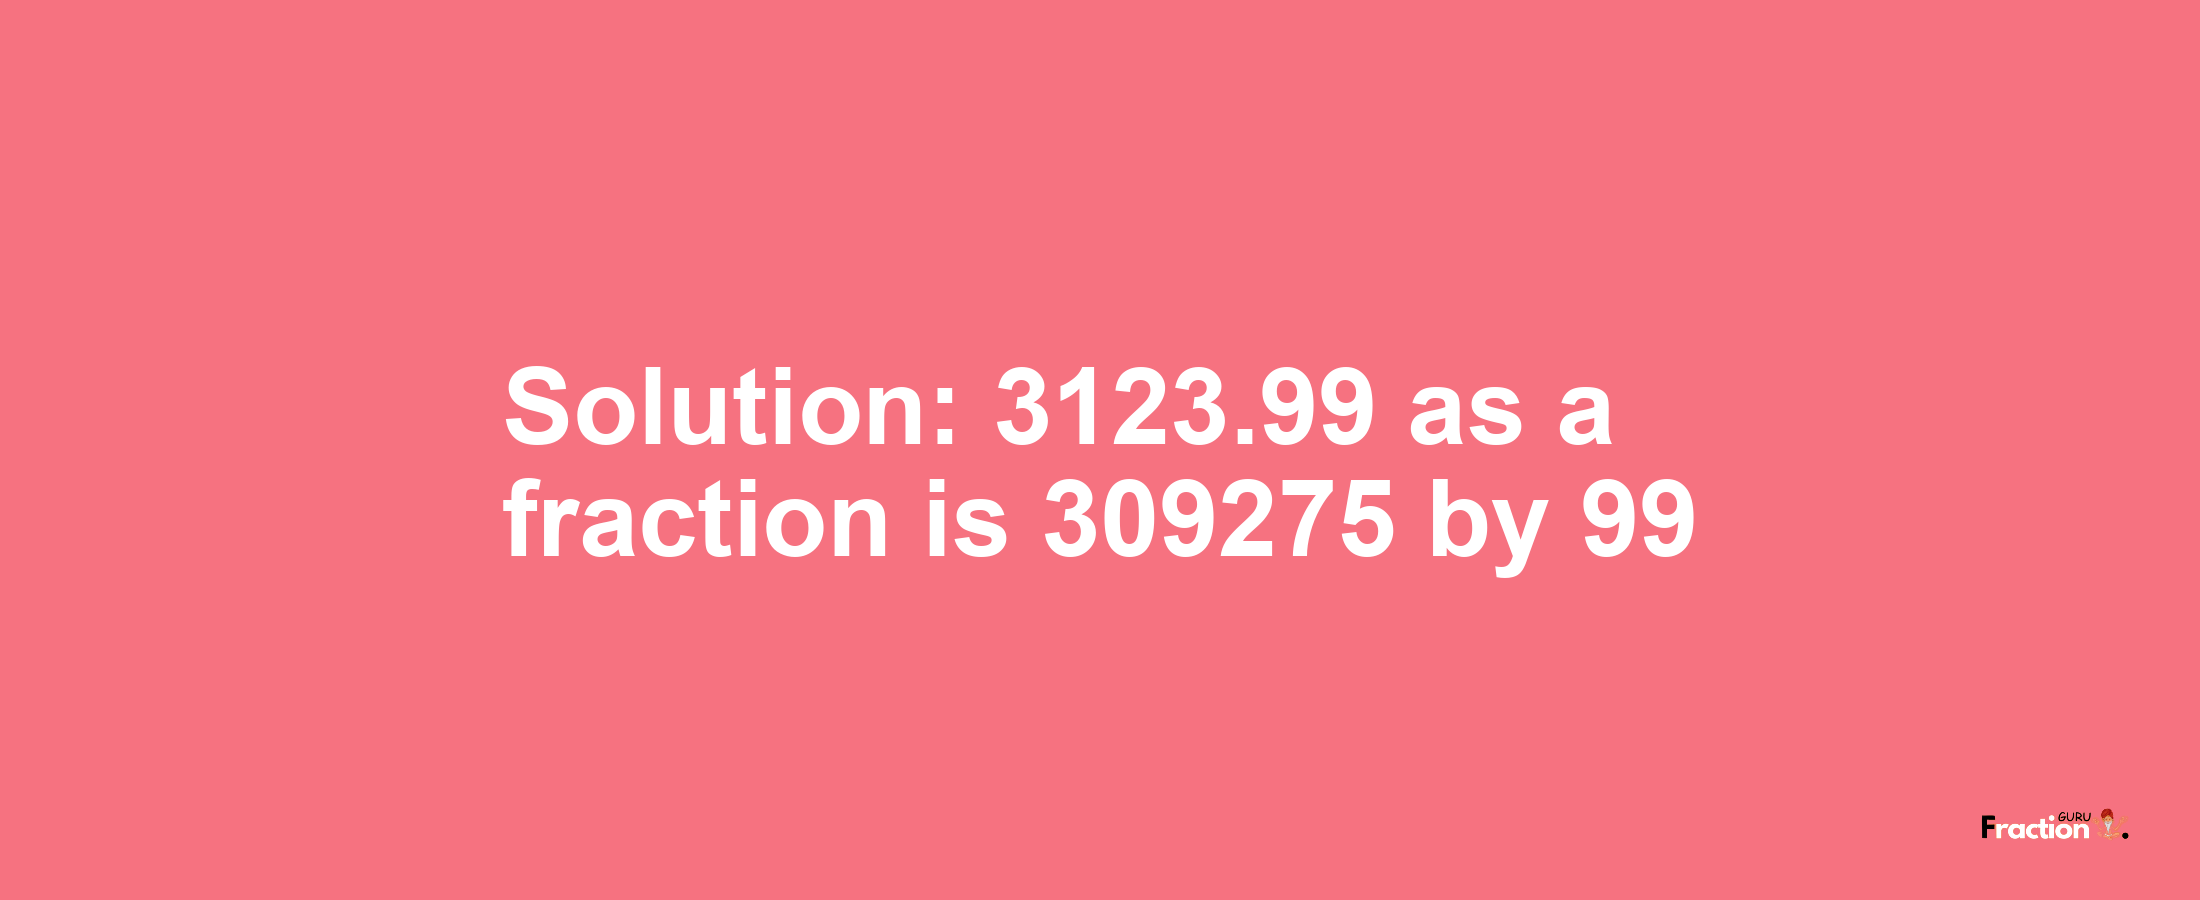 Solution:3123.99 as a fraction is 309275/99